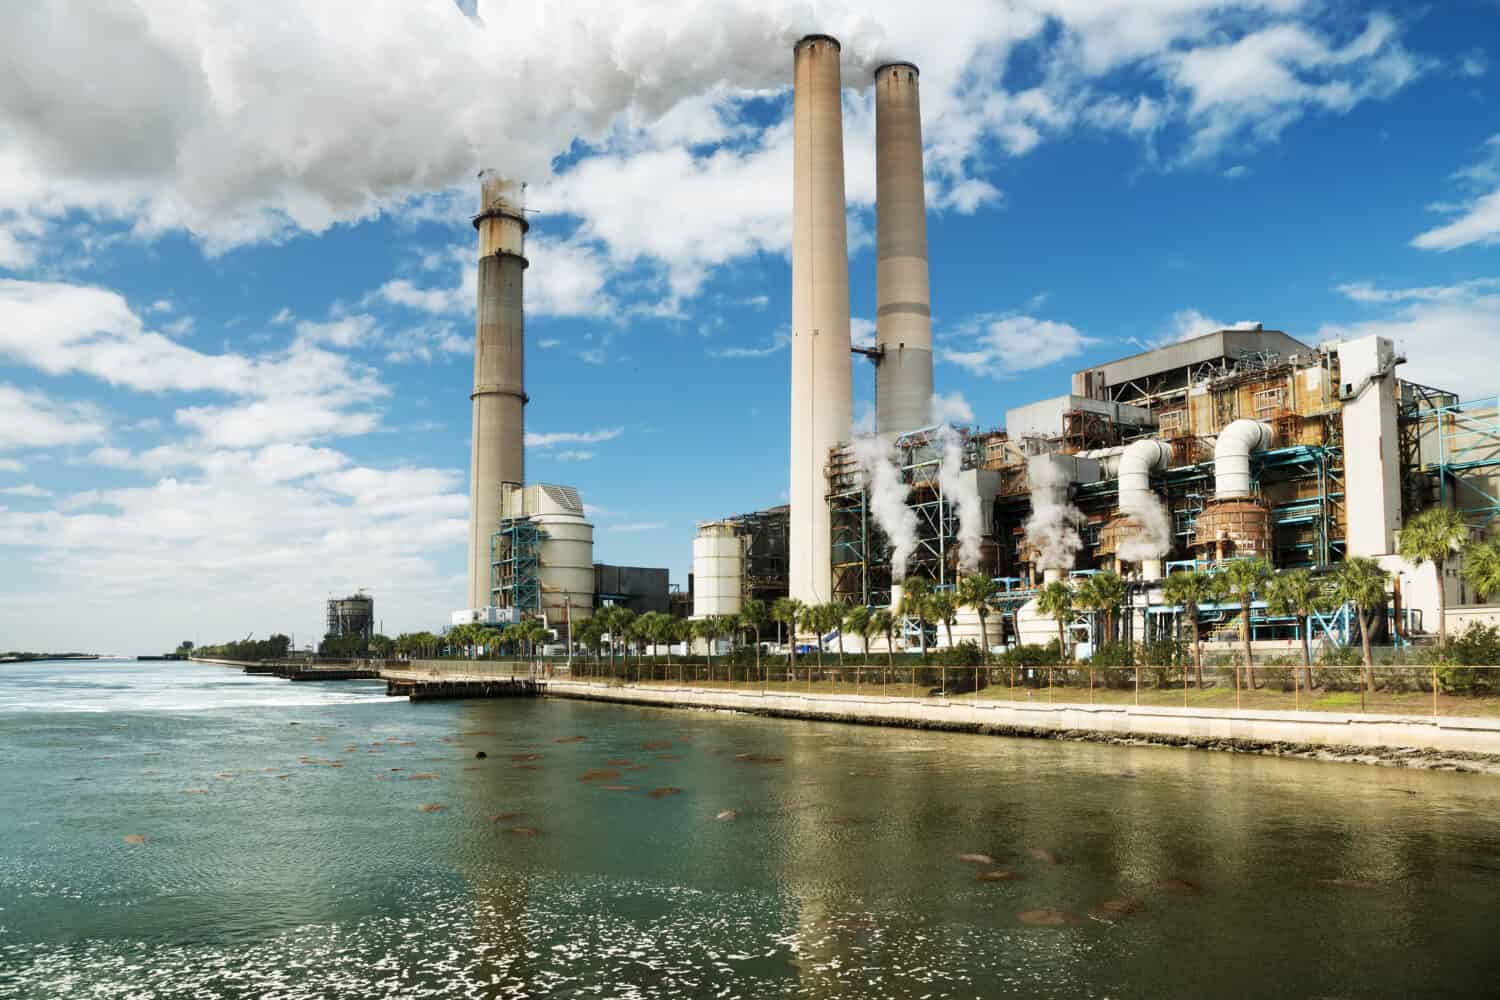 A large coal-fired power plant in Tampa and dozens of manatees basking in warm waters